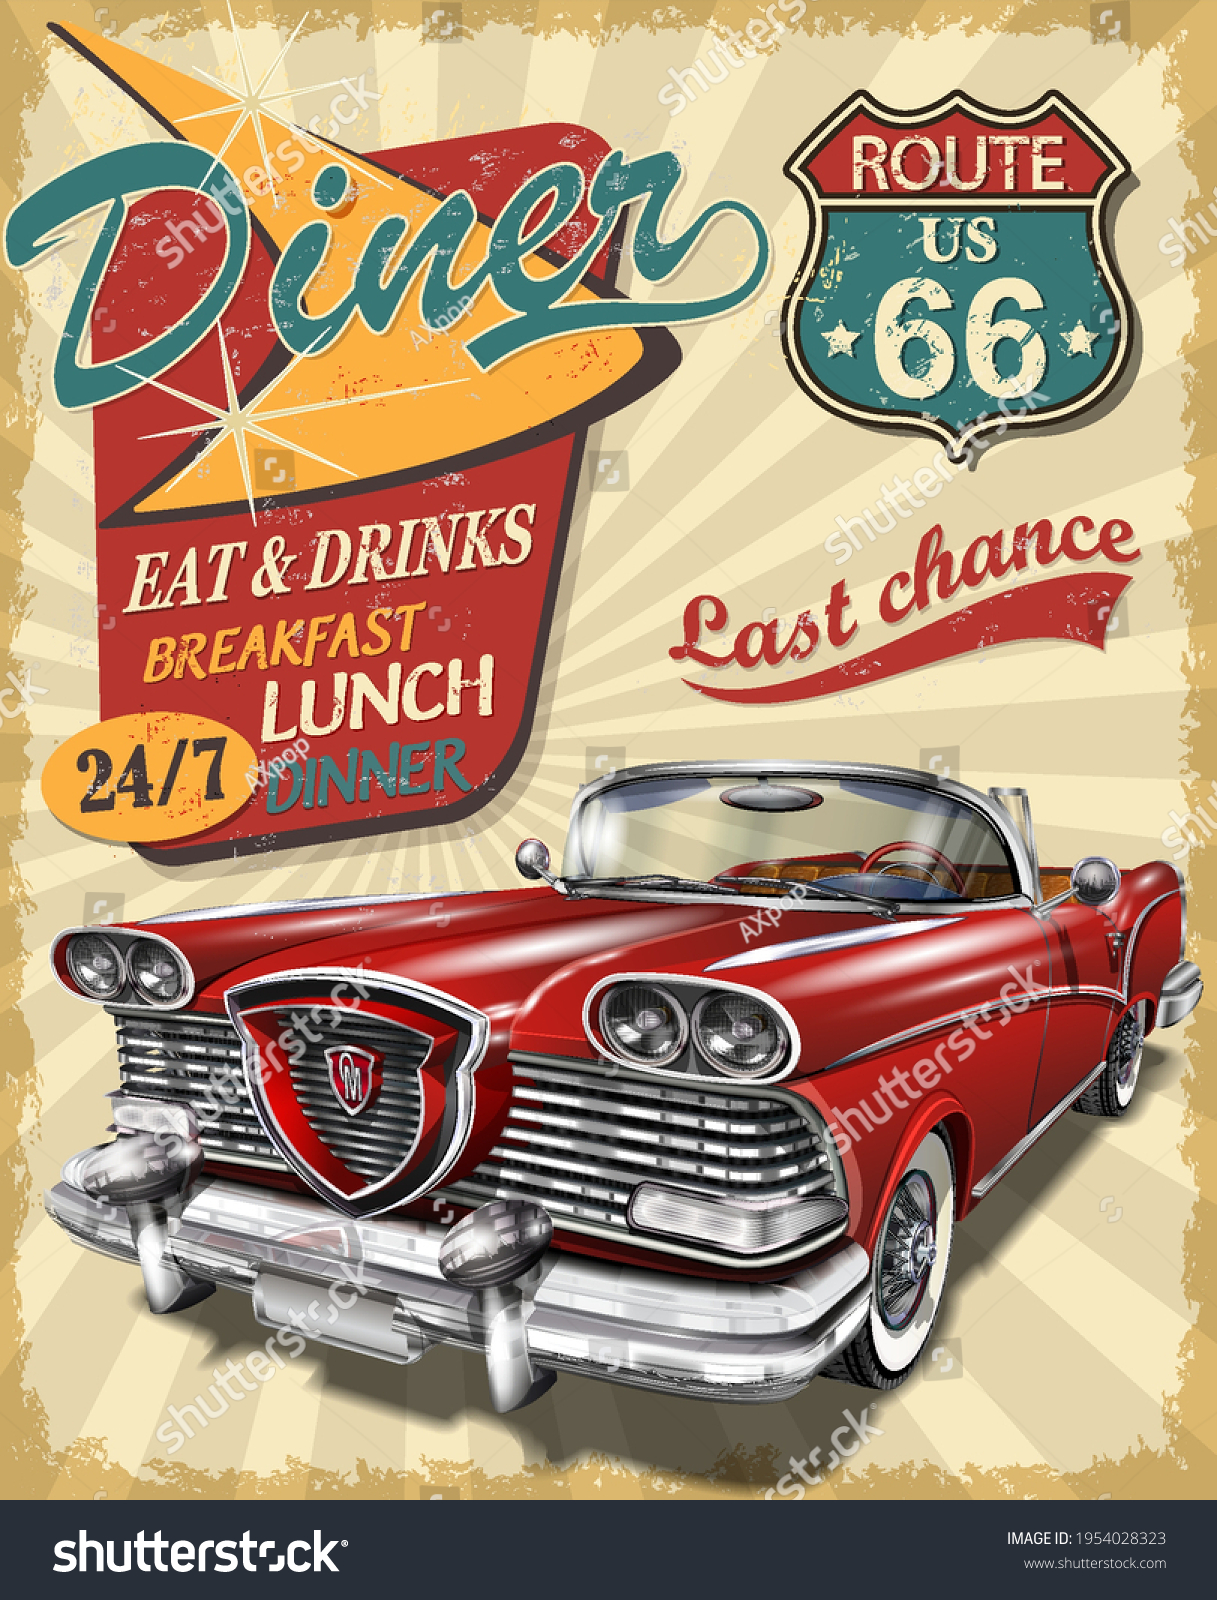 Diner route 66 vintage poster with Diner sign - Royalty Free Stock ...